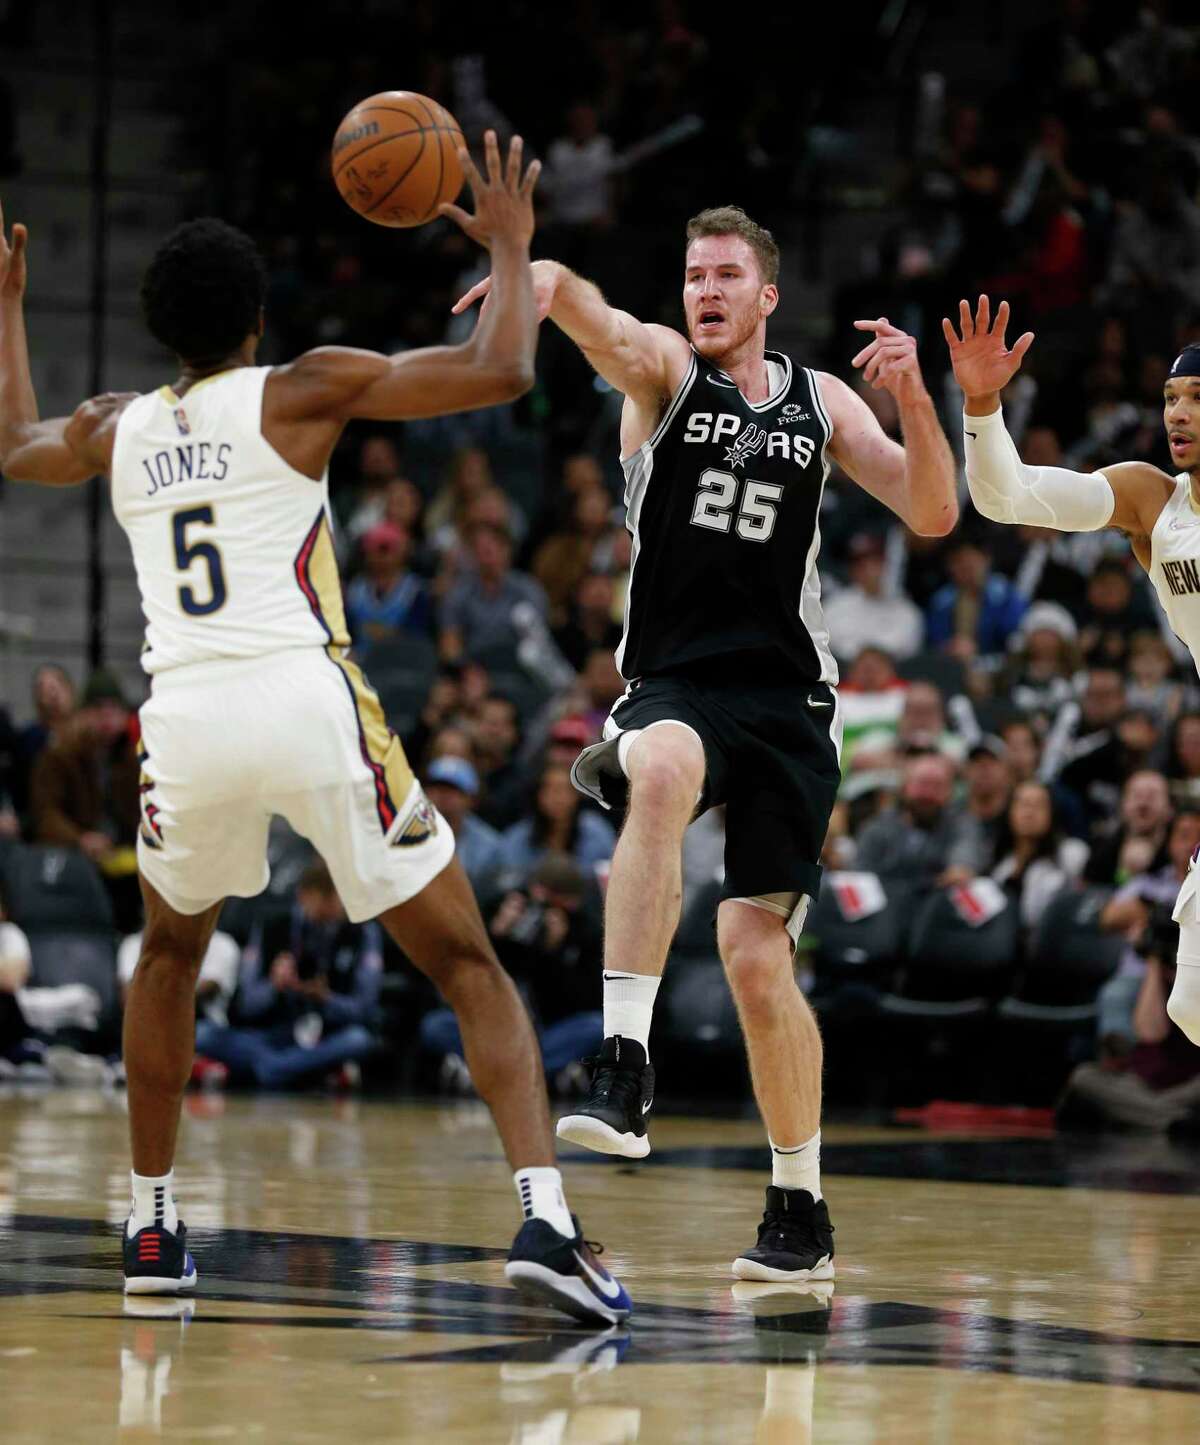 SAN ANTONIO, TX - DECEMBER 12: Jakob Poeltl #25 of the San Antonio Spurs has his pass intercepted by Josh Gray #5 of the New Orleans Pelicans in the second half at AT&T Center on December 12, 2021 in San Antonio, Texas. NOTE TO USER: User expressly acknowledges and agrees that , by downloading and or using this photograph, User is consenting to the terms and conditions of the Getty Images License Agreement. (Photo by Ronald Cortes/Getty Images)